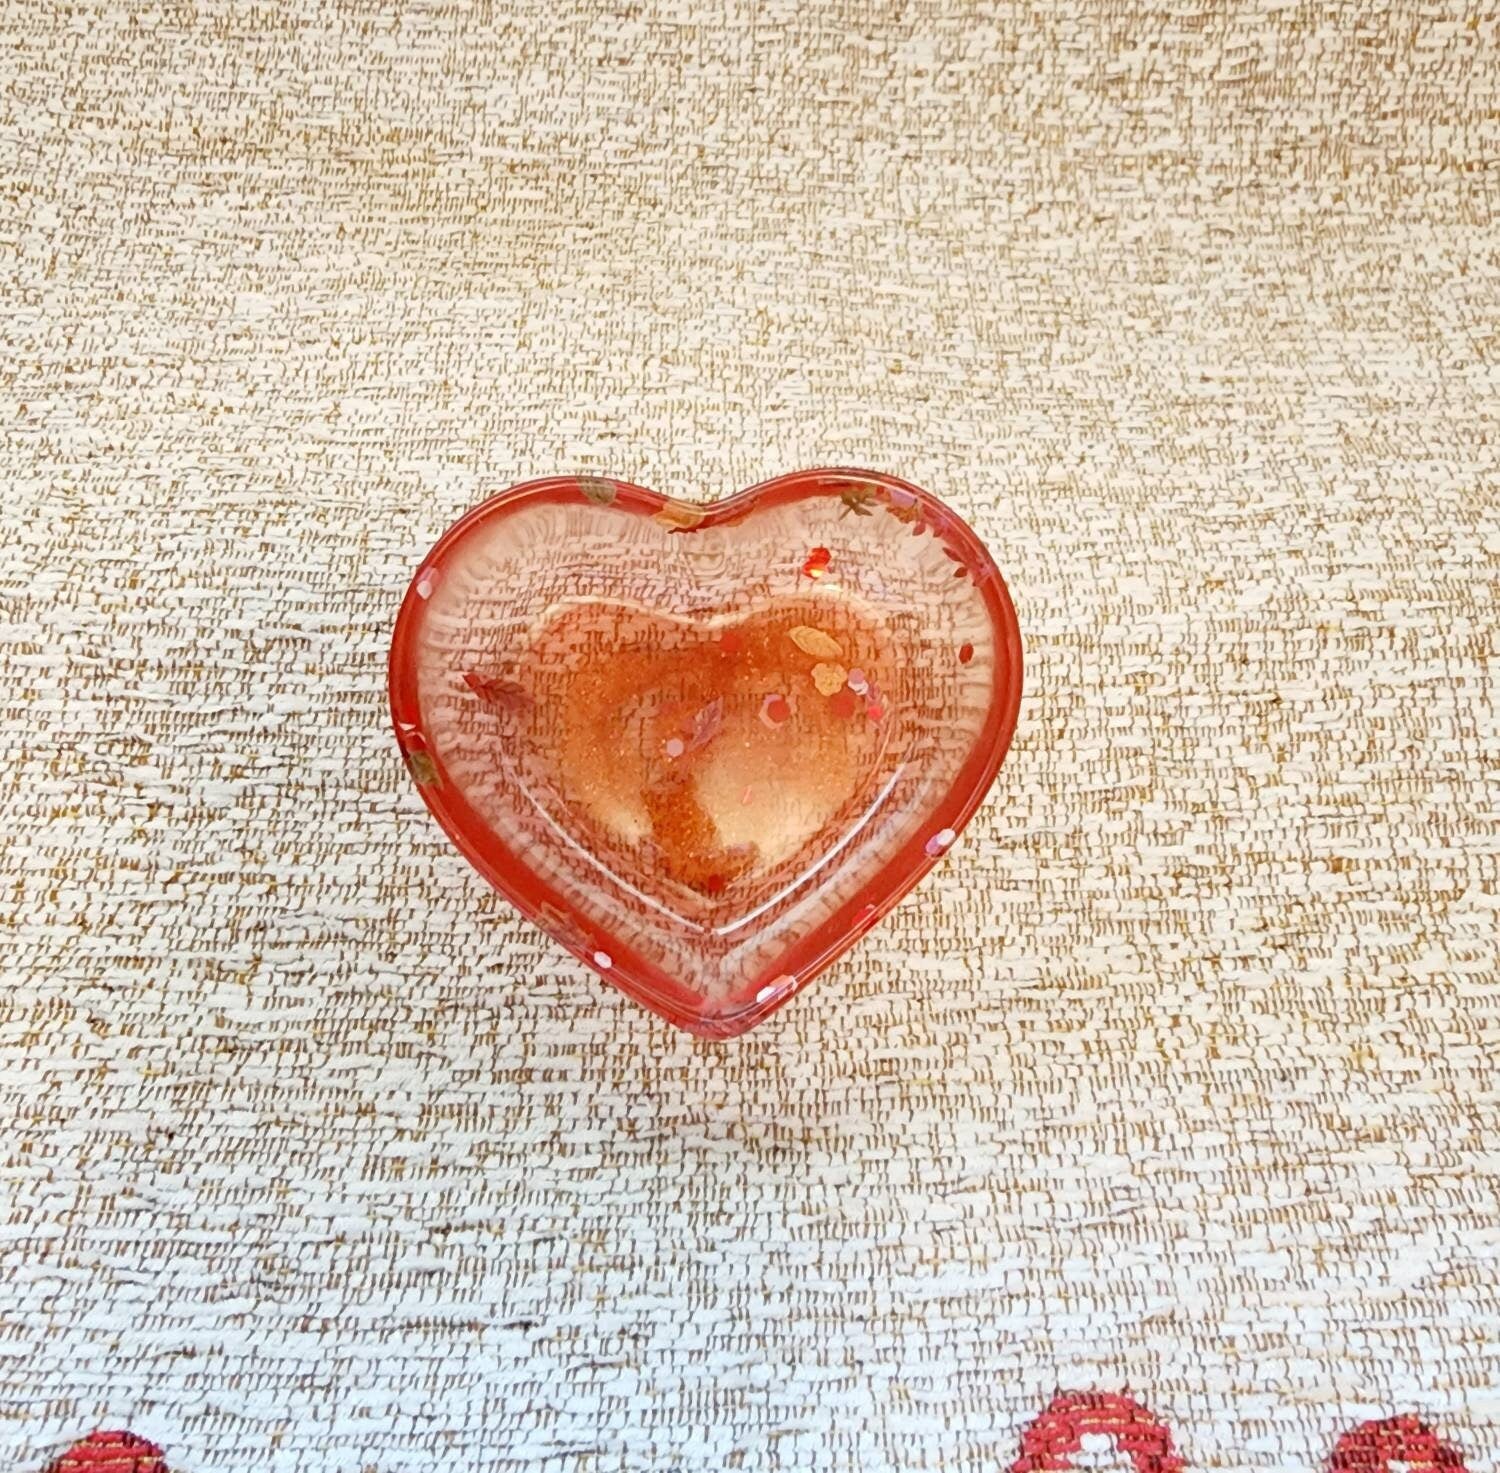 Multiple Designs Heart Shaped Jewelry Dish, Resin Dish